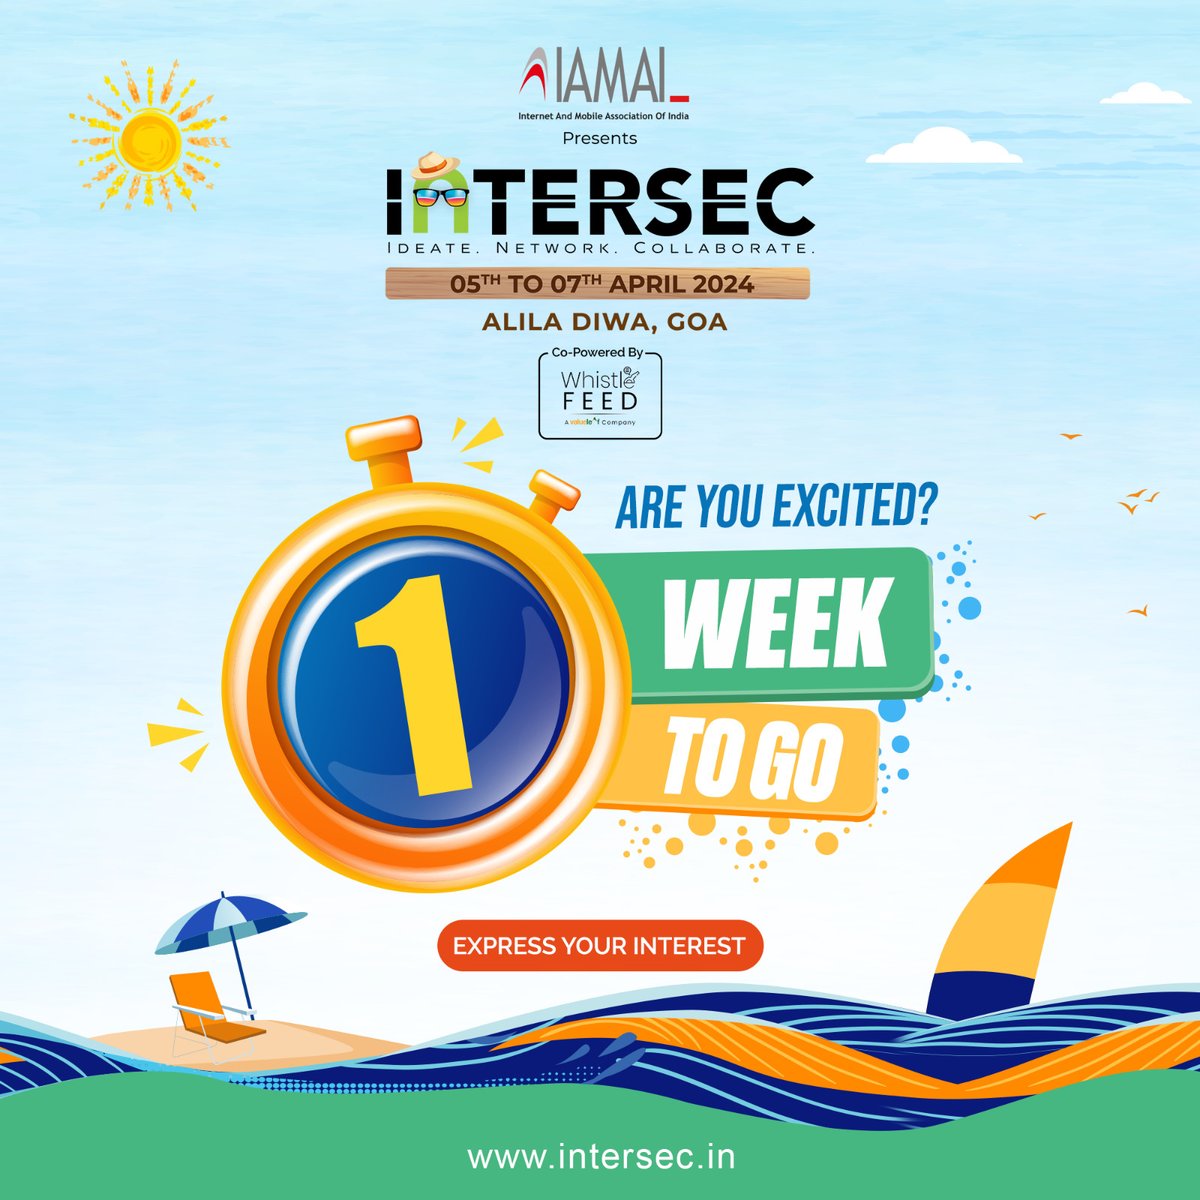 Counting the days to Intersec! Join us in Goa for an unforgettable digital adventure. 🚀 Don't miss out on marketing magic! For more details visit intersec.in. #Intersec24 #IAMAI #GoaCalling #DigitalAdventure #MarketingMagic #KeynoteByTheBeach #IntersecInGoa